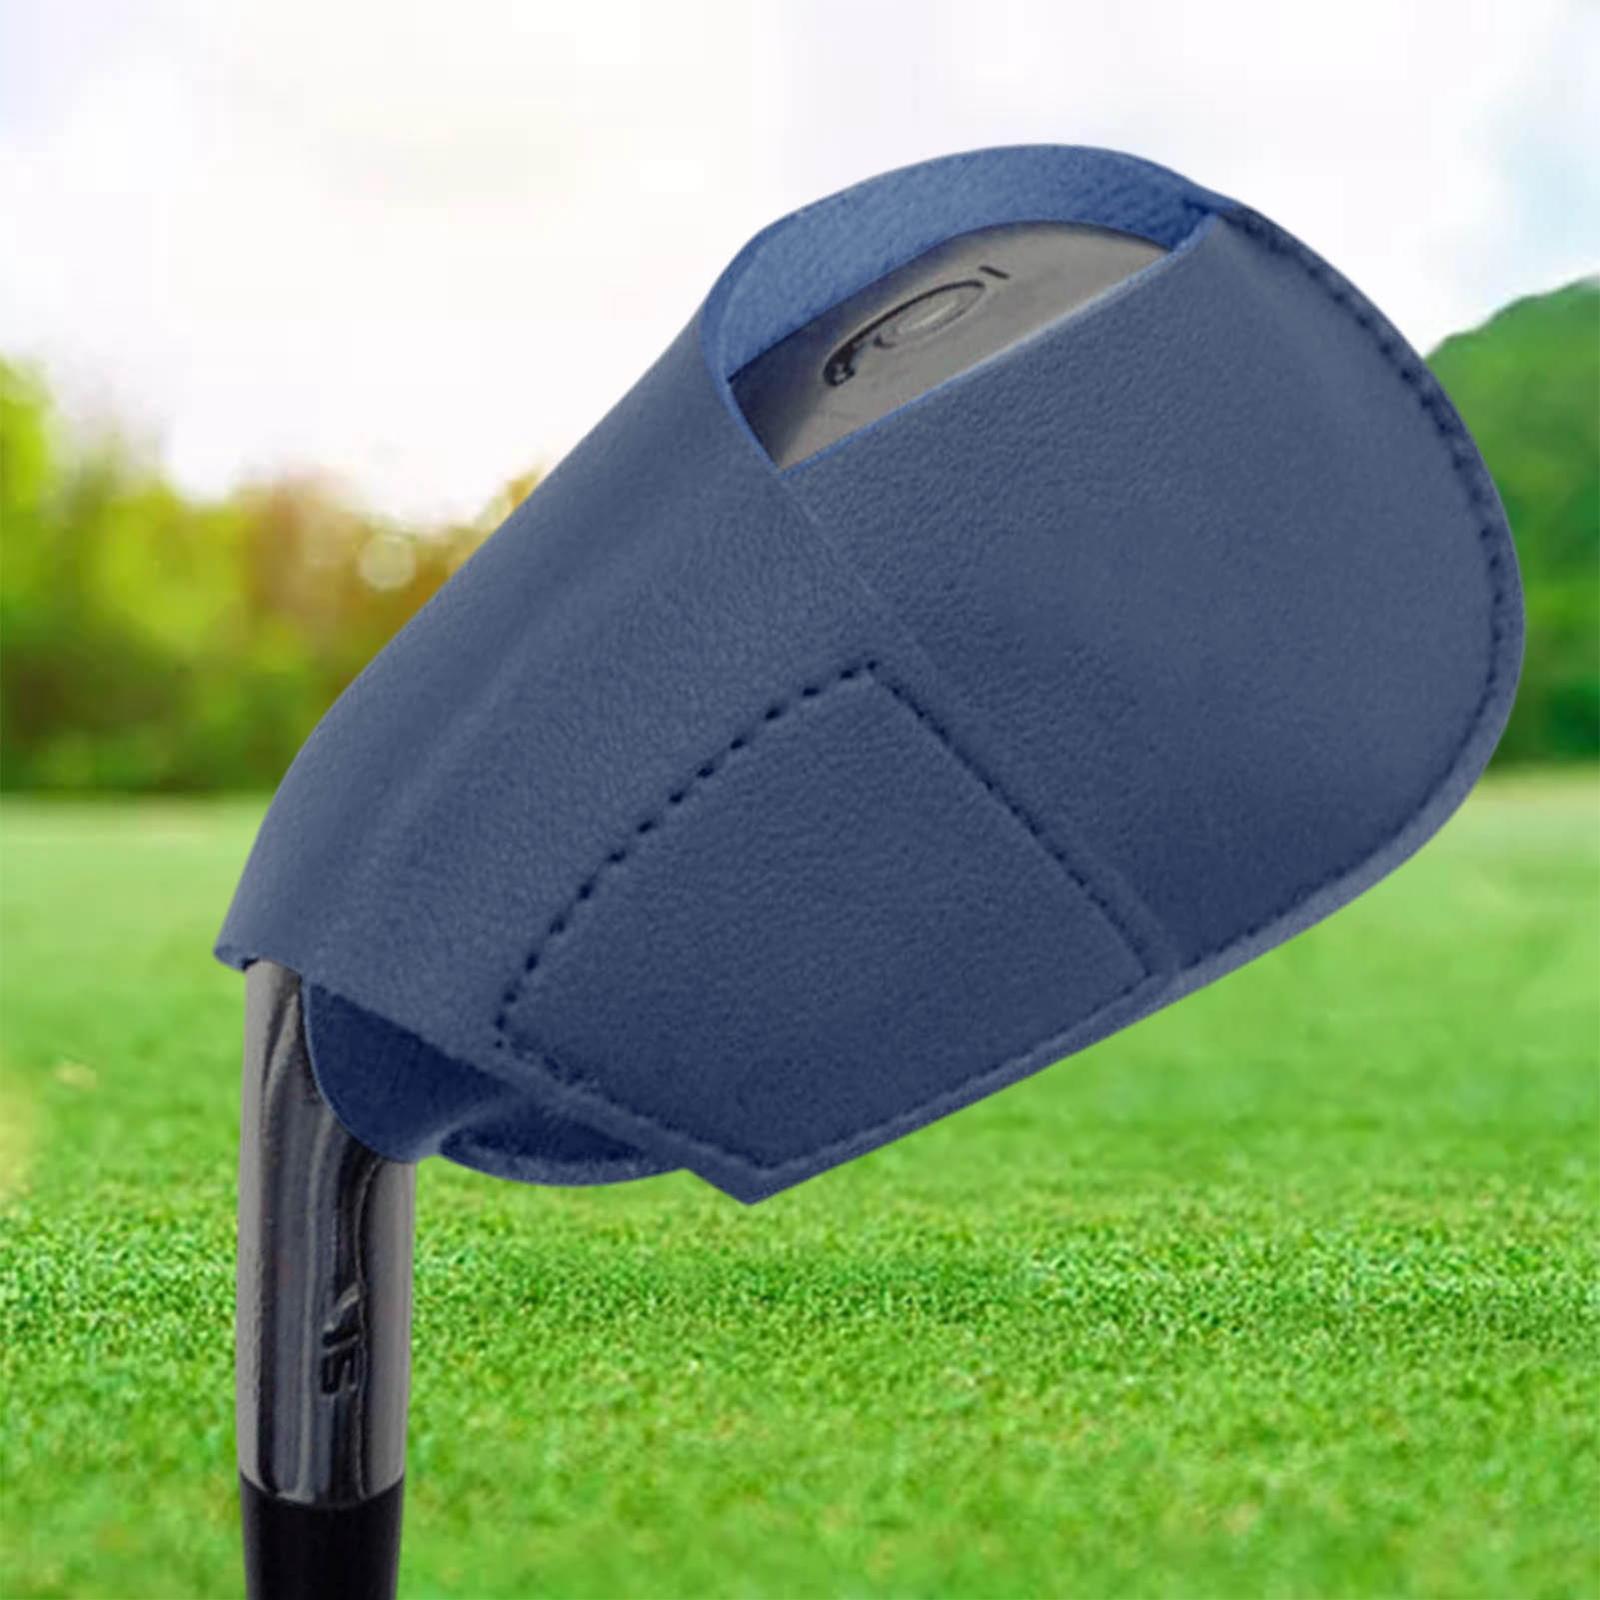 PU Leather Head Cover Protector Golf Iron Head Cover for Golf Blue